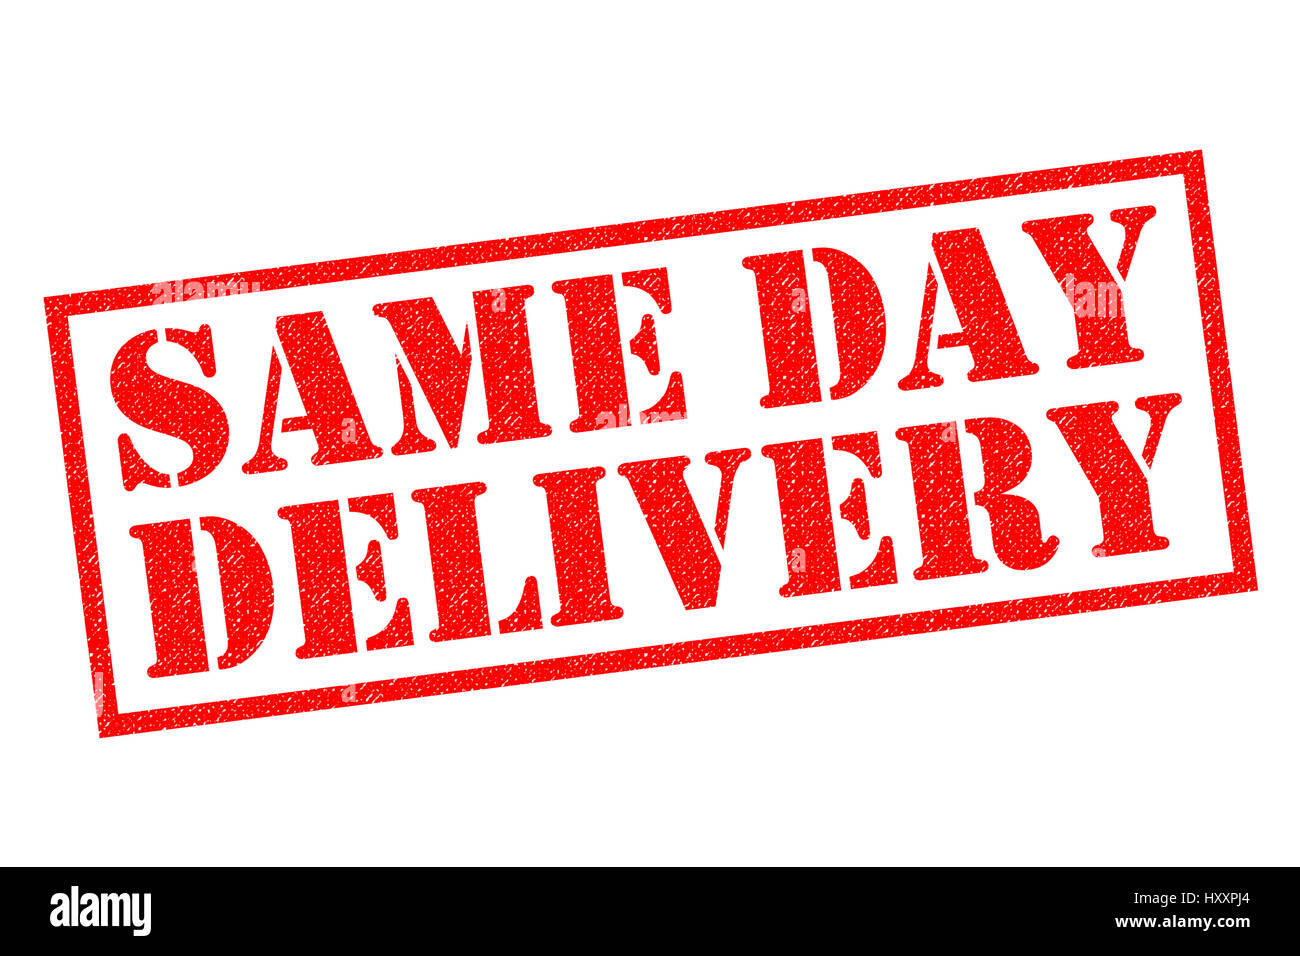 https://c8.alamy.com/comp/HXXPJ4/same-day-delivery-red-rubber-stamp-over-a-white-background-HXXPJ4.jpg